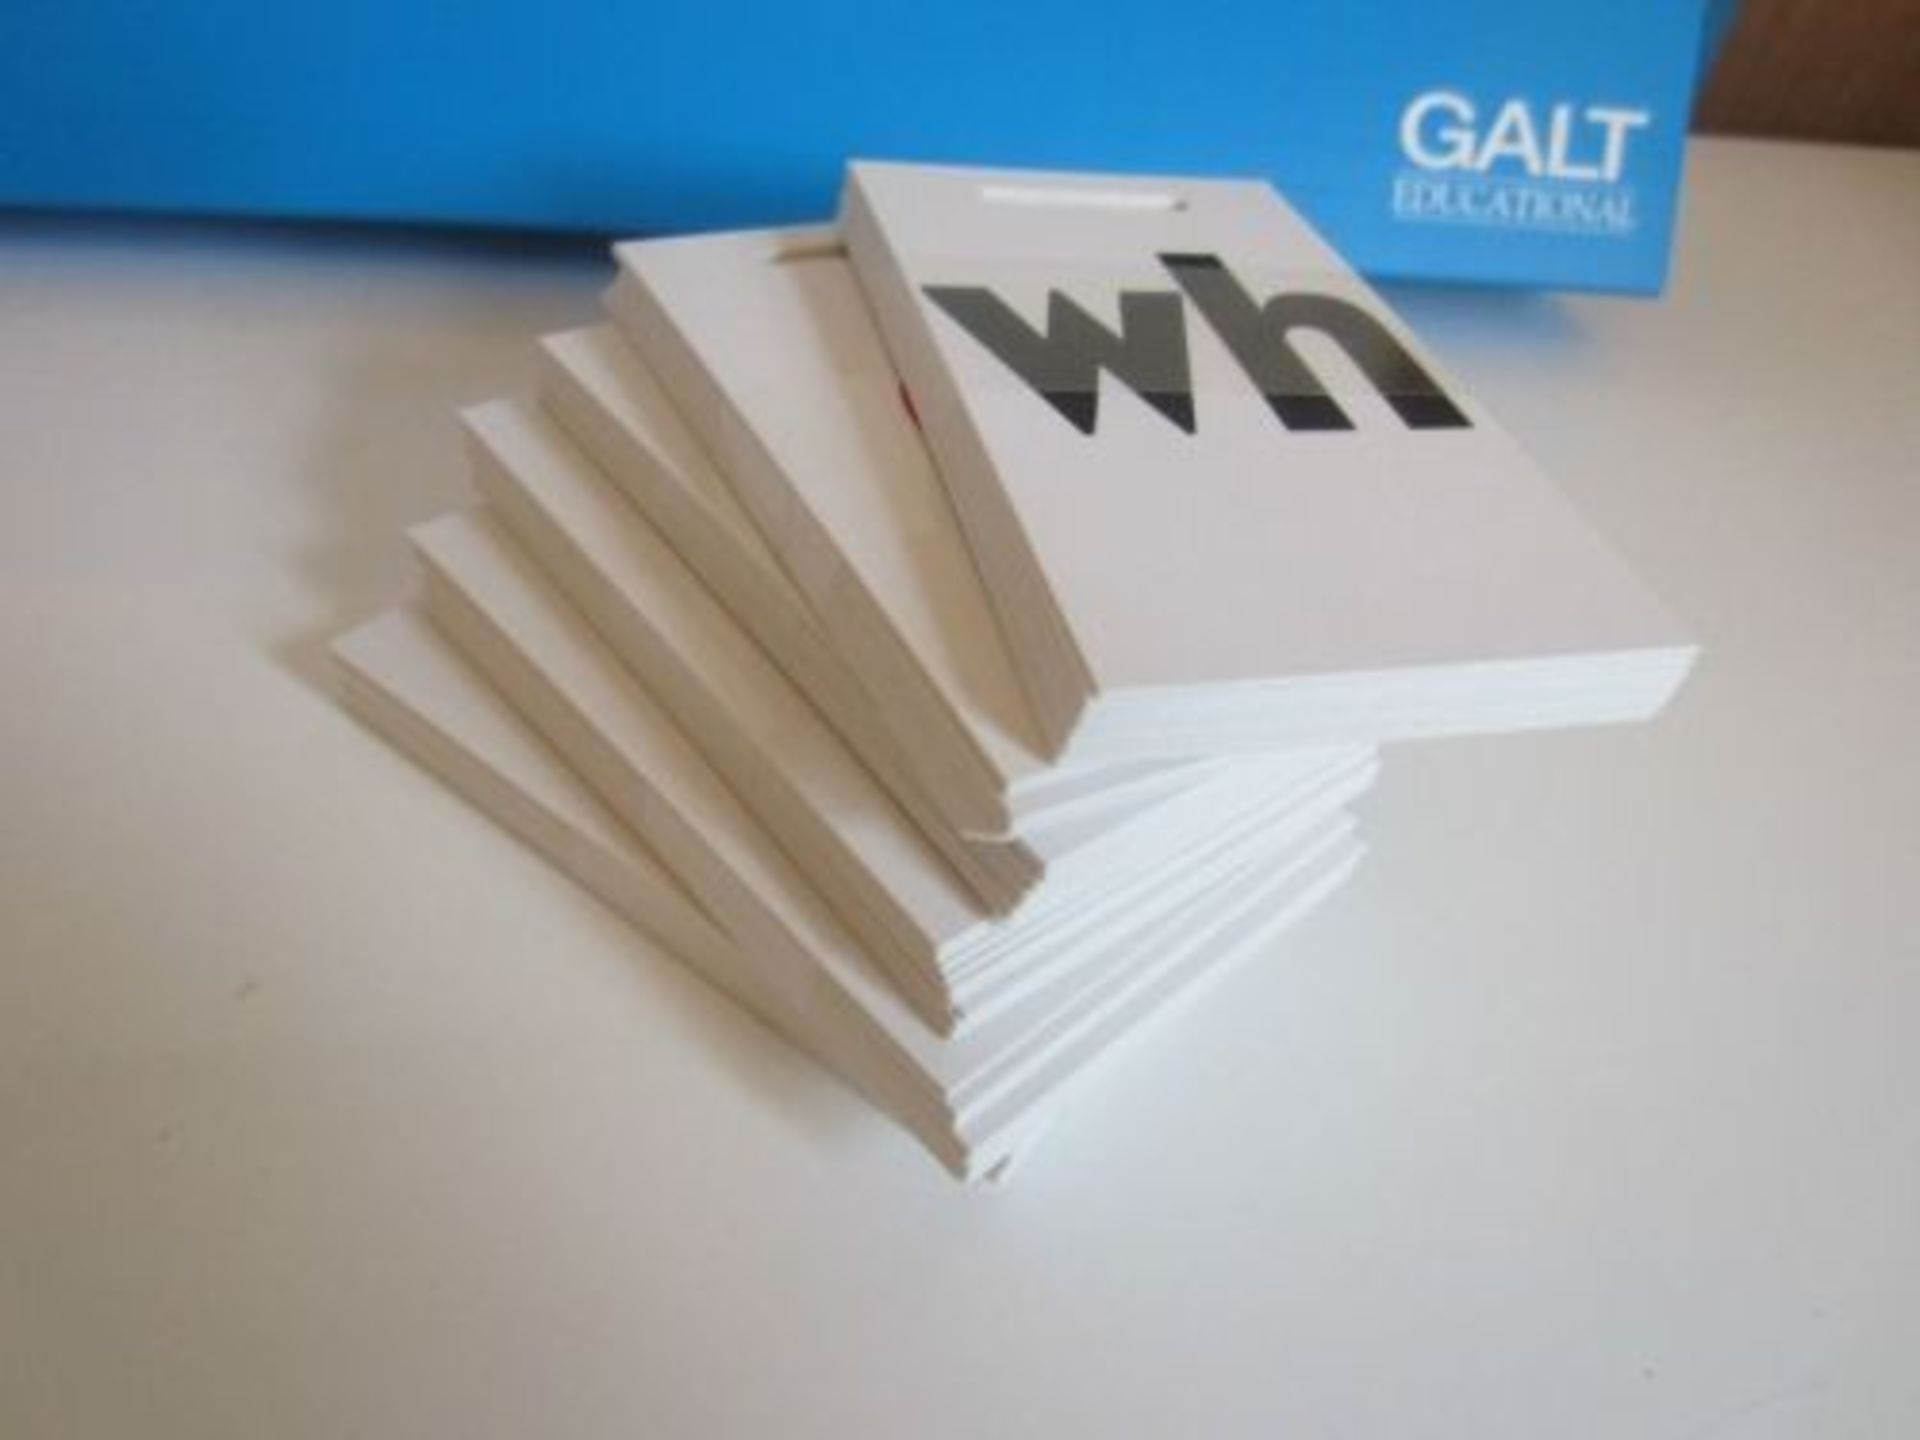 36 x Galt Educational WORDS FLIP CARDS With Stands - WORD BUILDER - For Educational Purposes - Ideal - Image 2 of 6